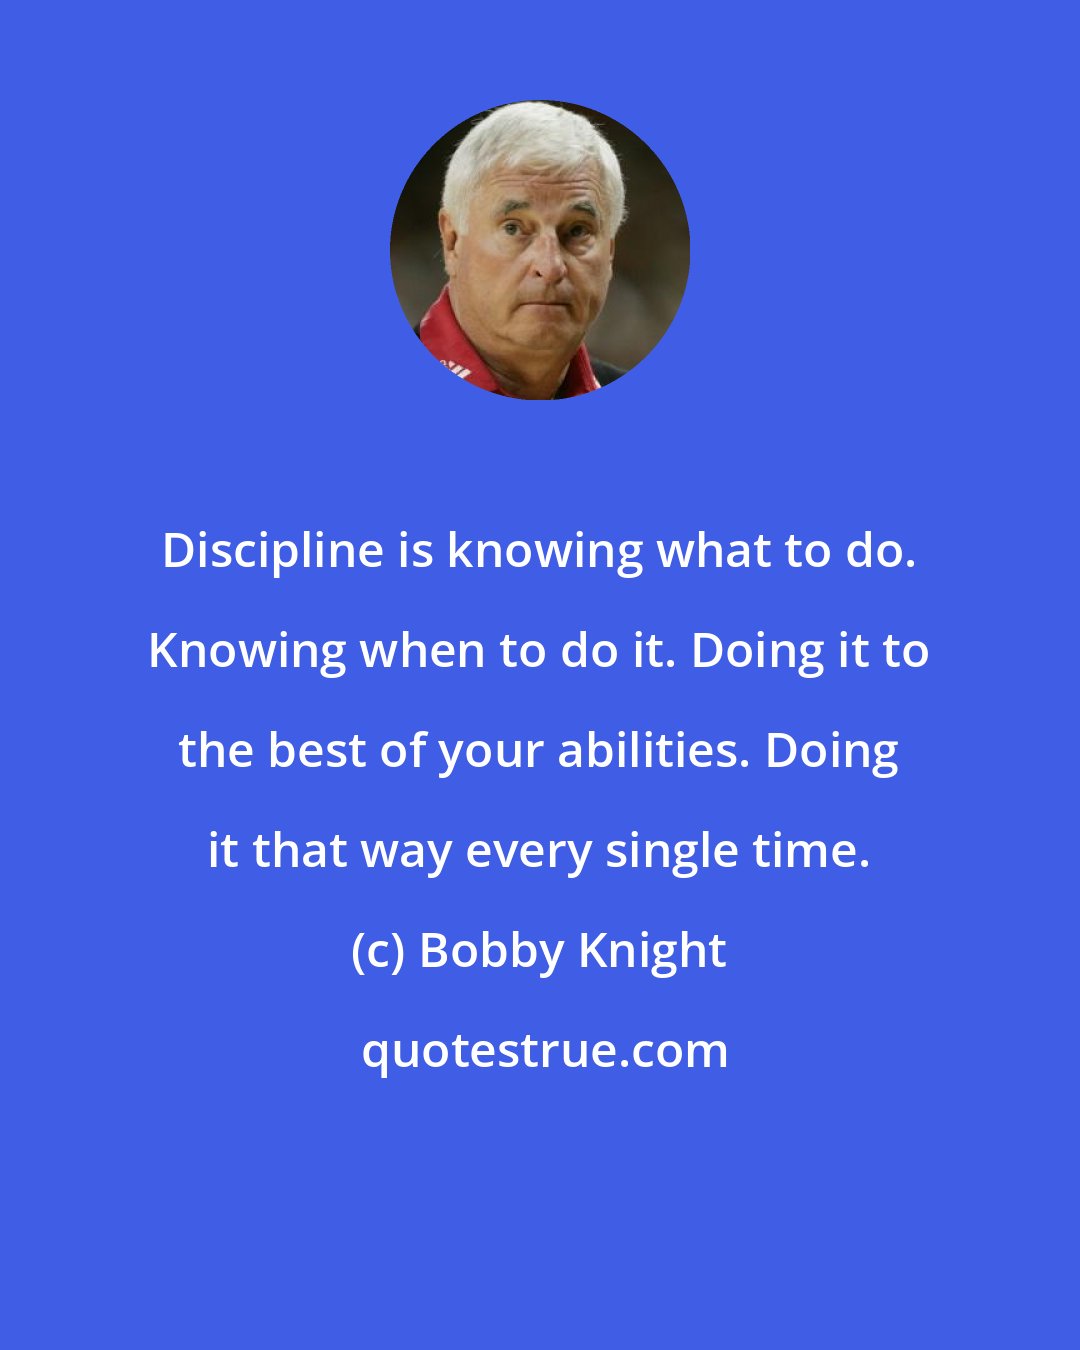 Bobby Knight: Discipline is knowing what to do. Knowing when to do it. Doing it to the best of your abilities. Doing it that way every single time.